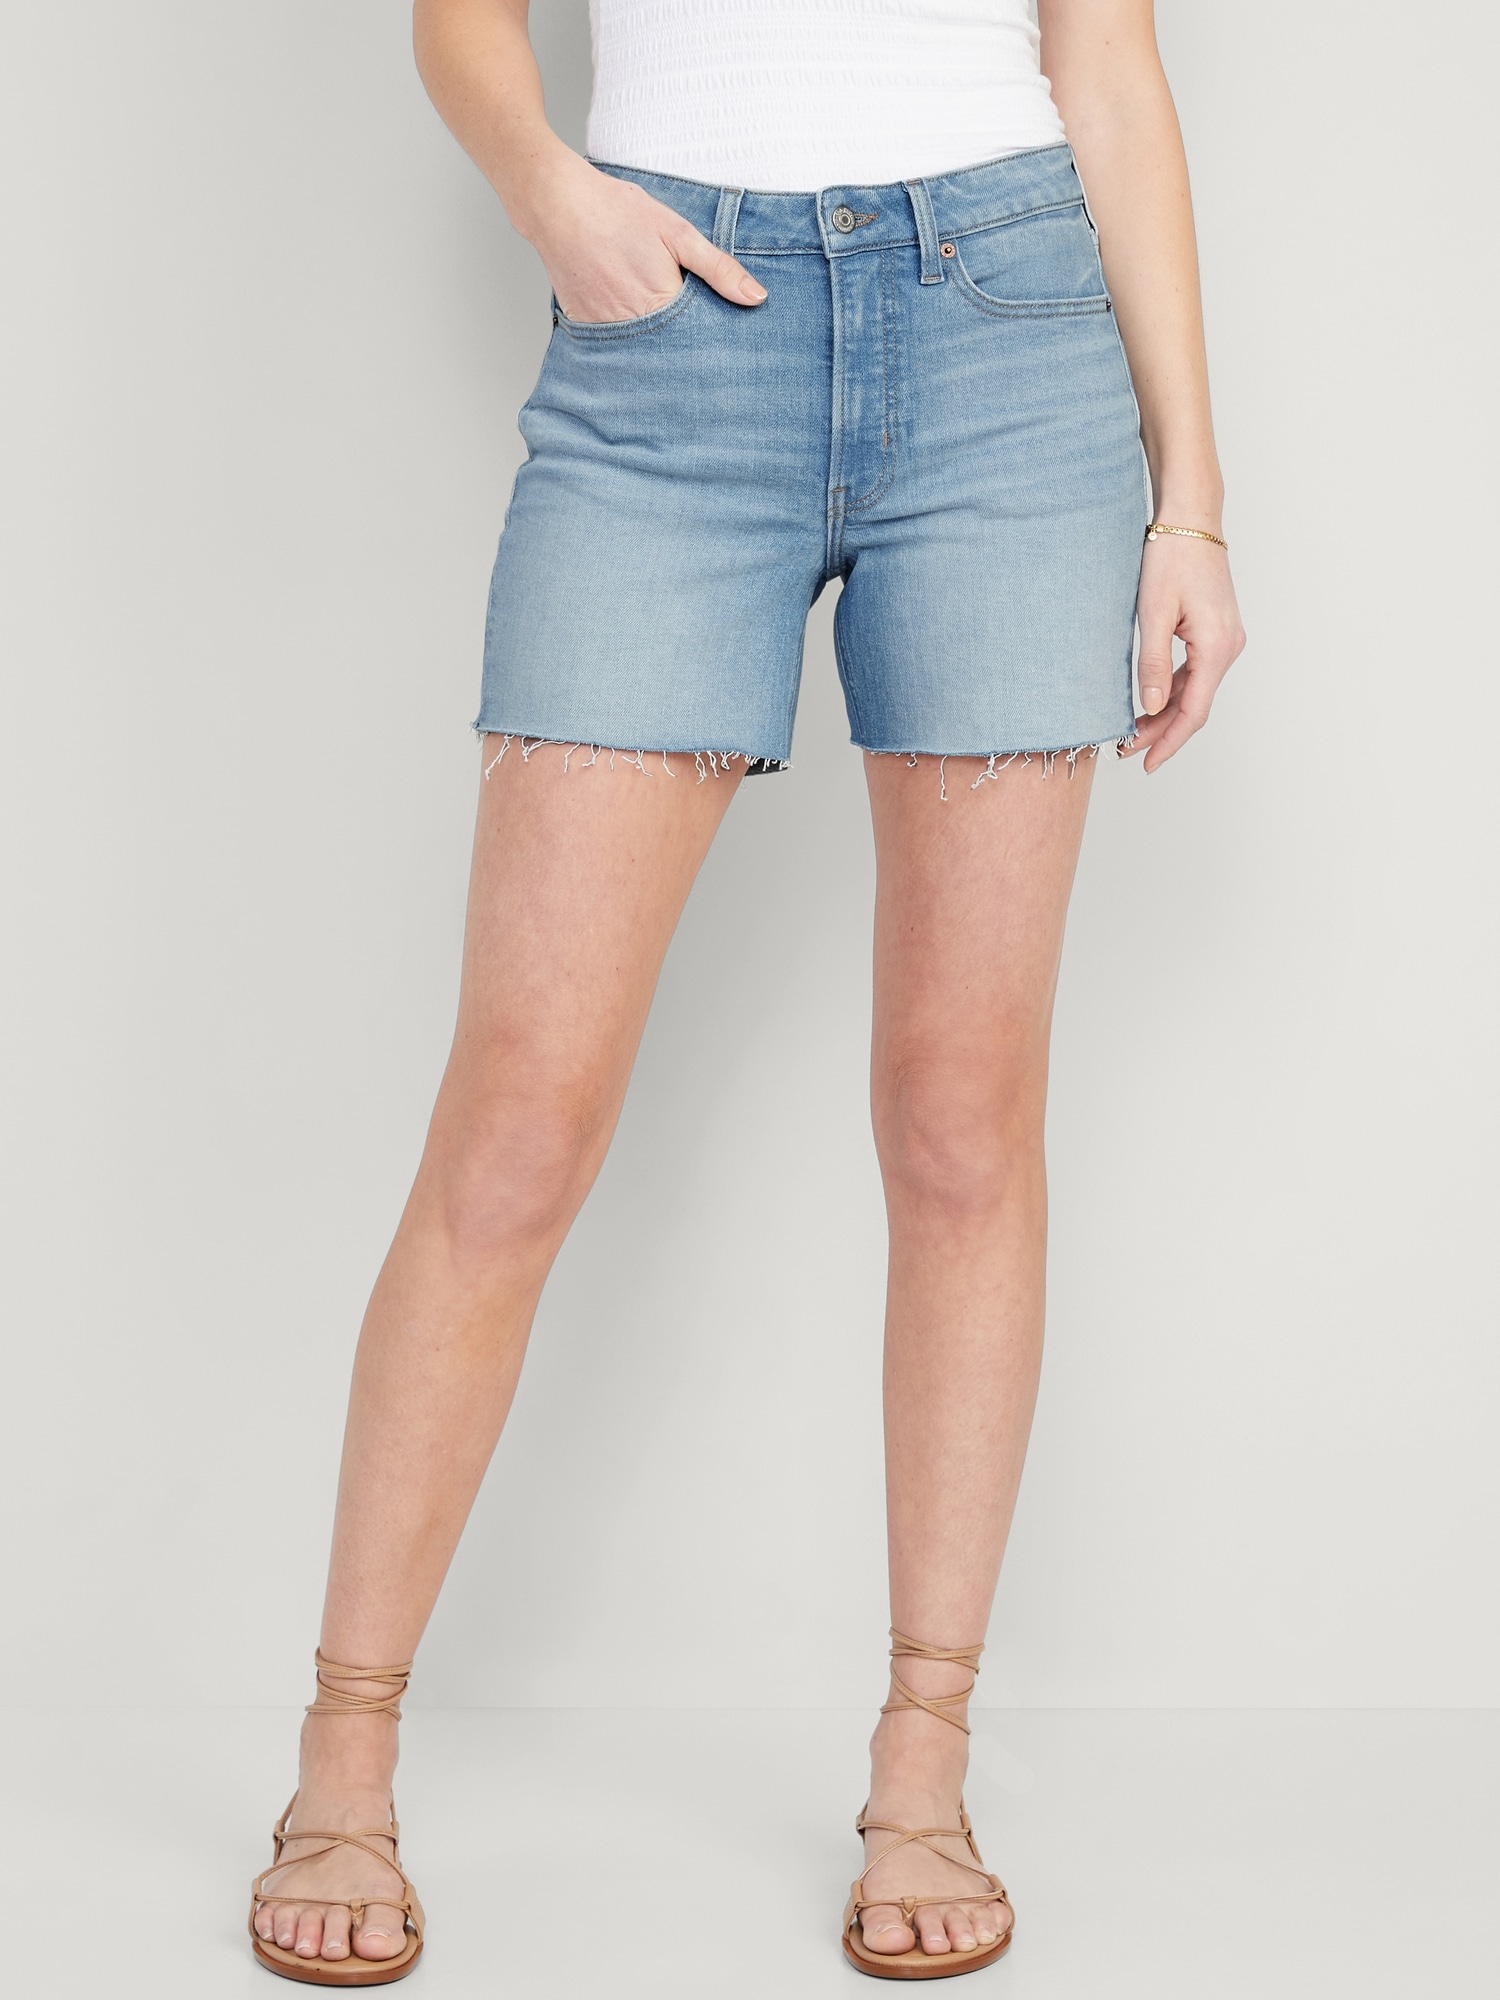 Low-Rise OG Straight Ripped Super-Short Jean Shorts – 1.5-inch inseam